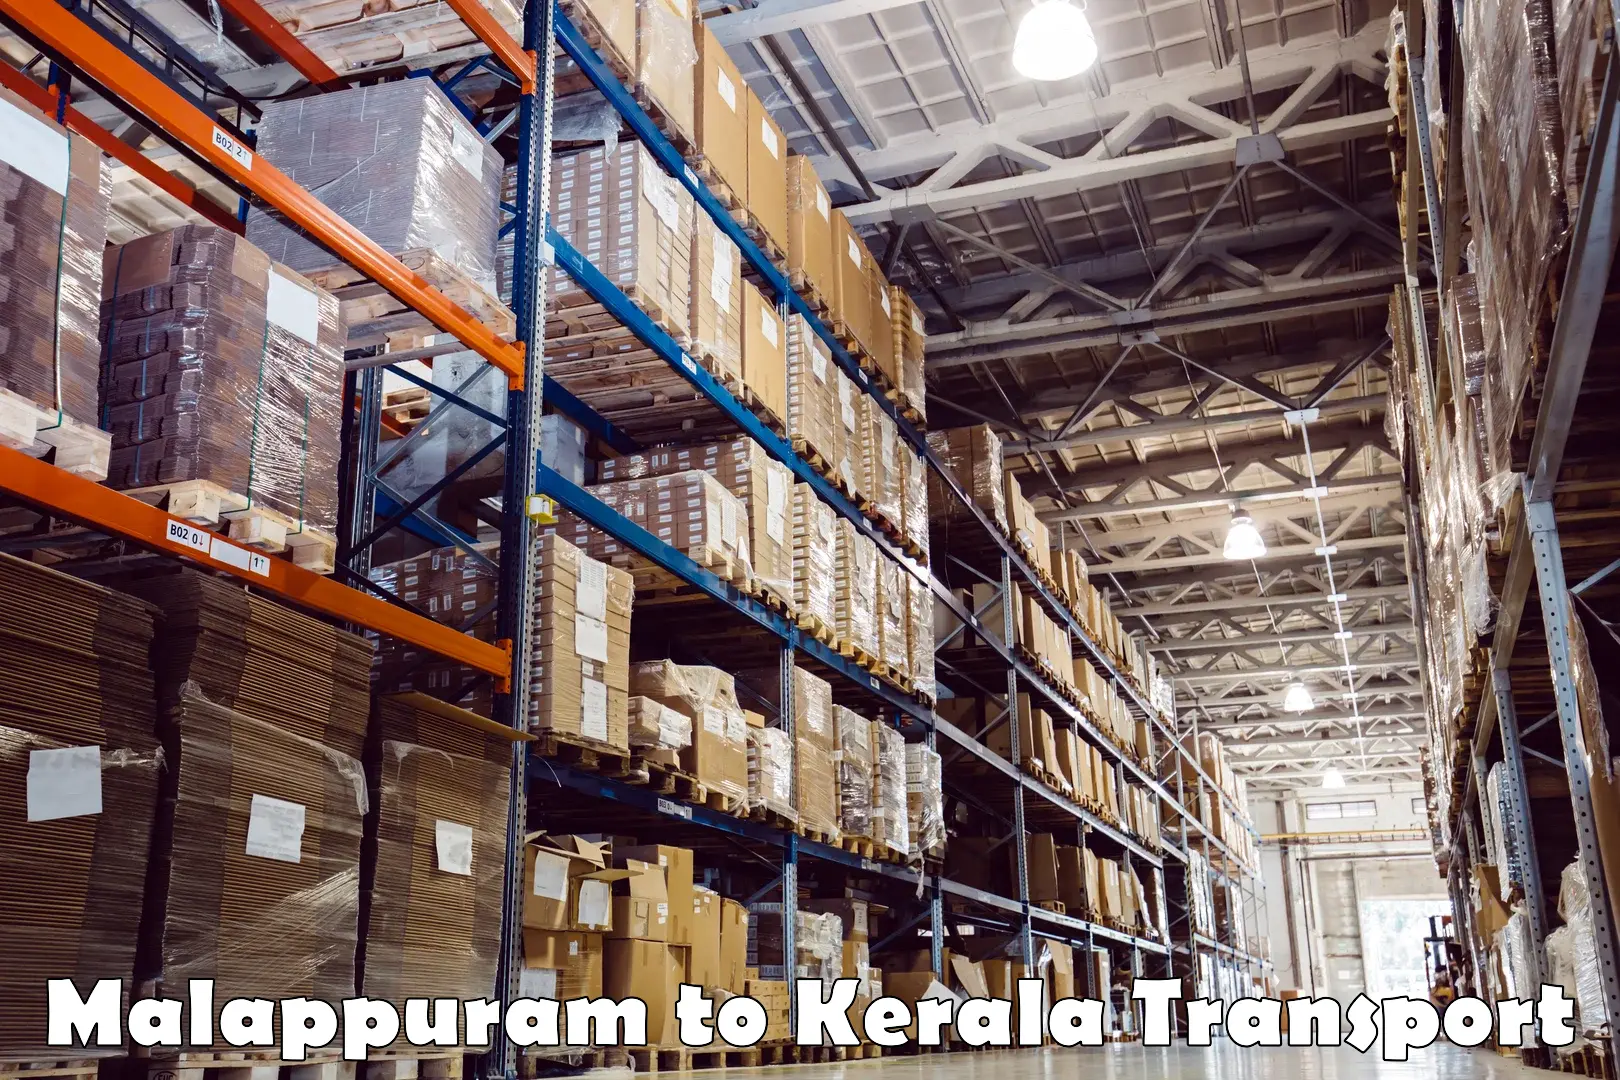 Transport bike from one state to another Malappuram to Kerala